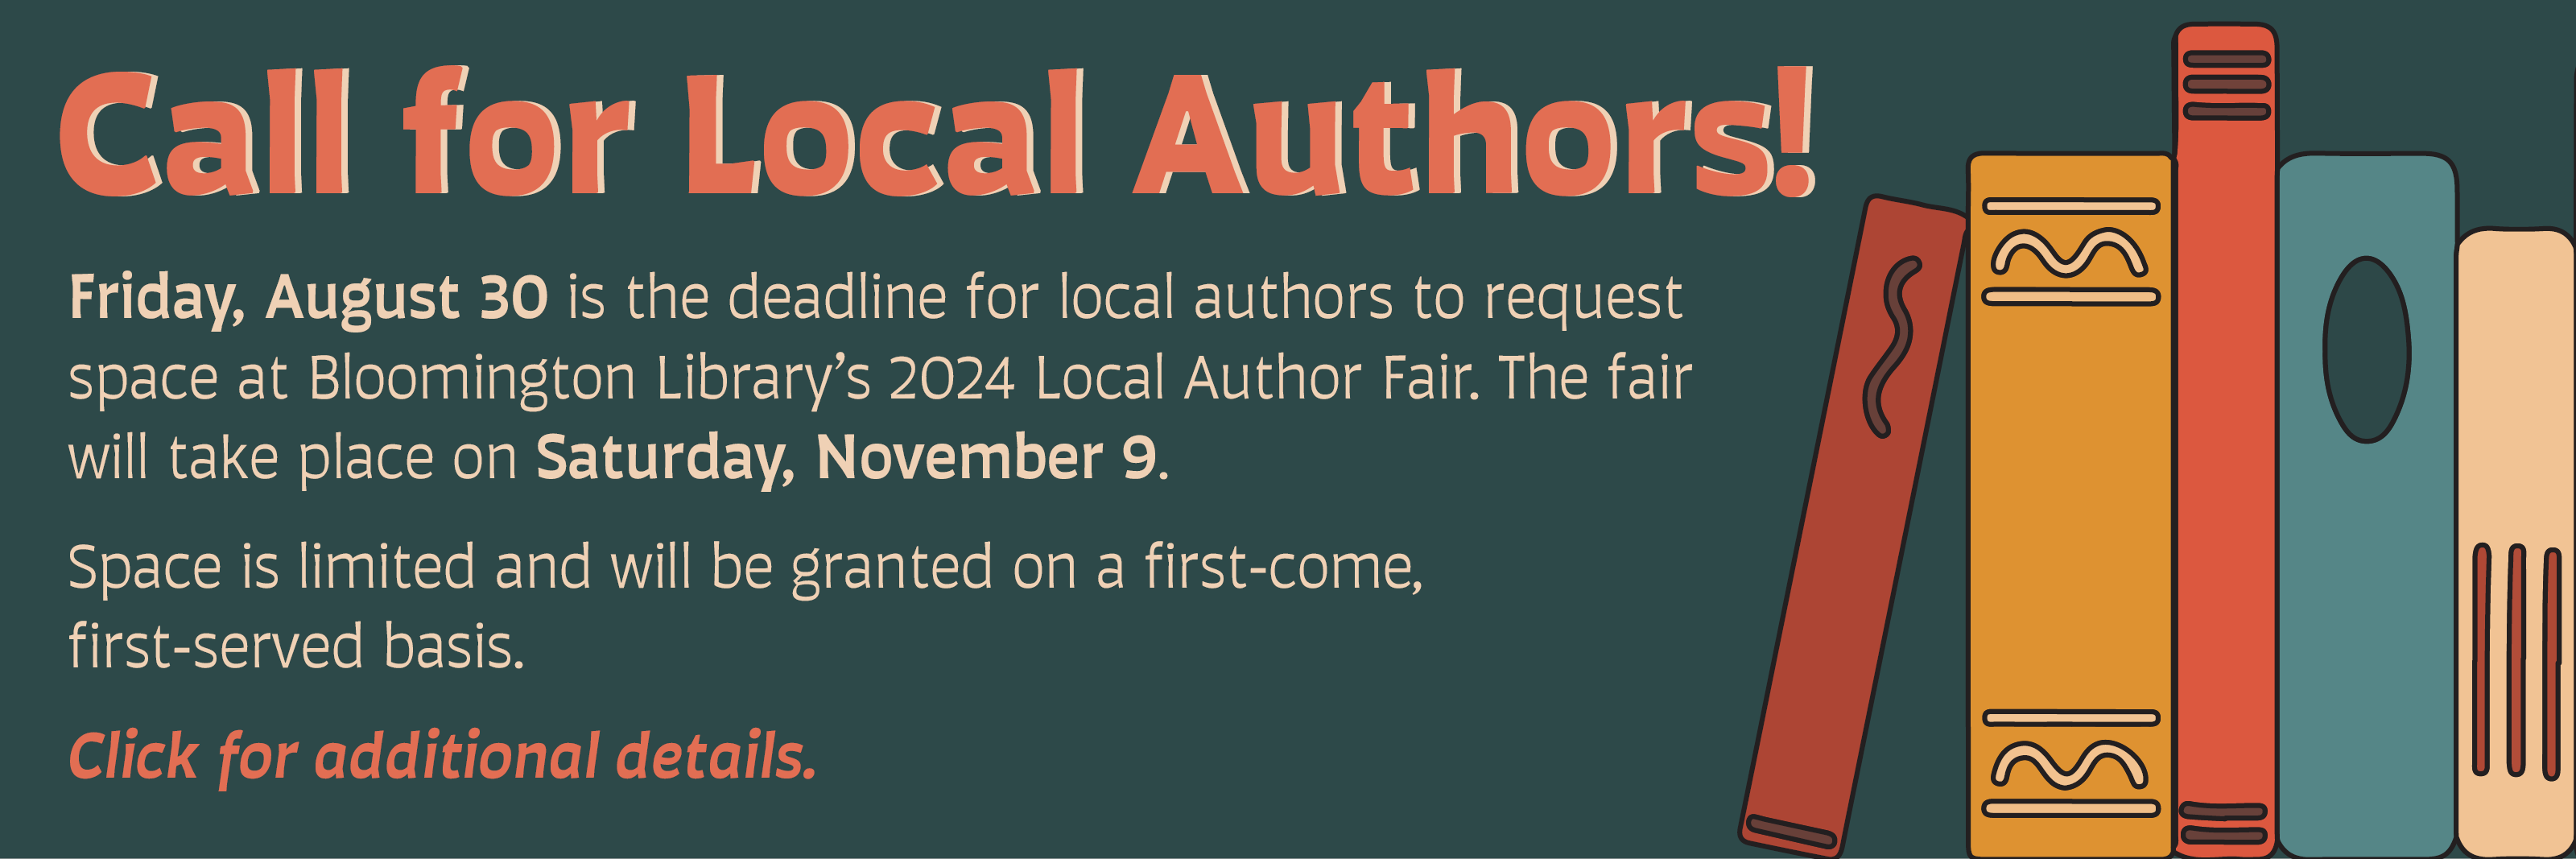 Call for Local Authors to submit an application by August 30 for the Local Author Fair program the library is hosting on November 9.